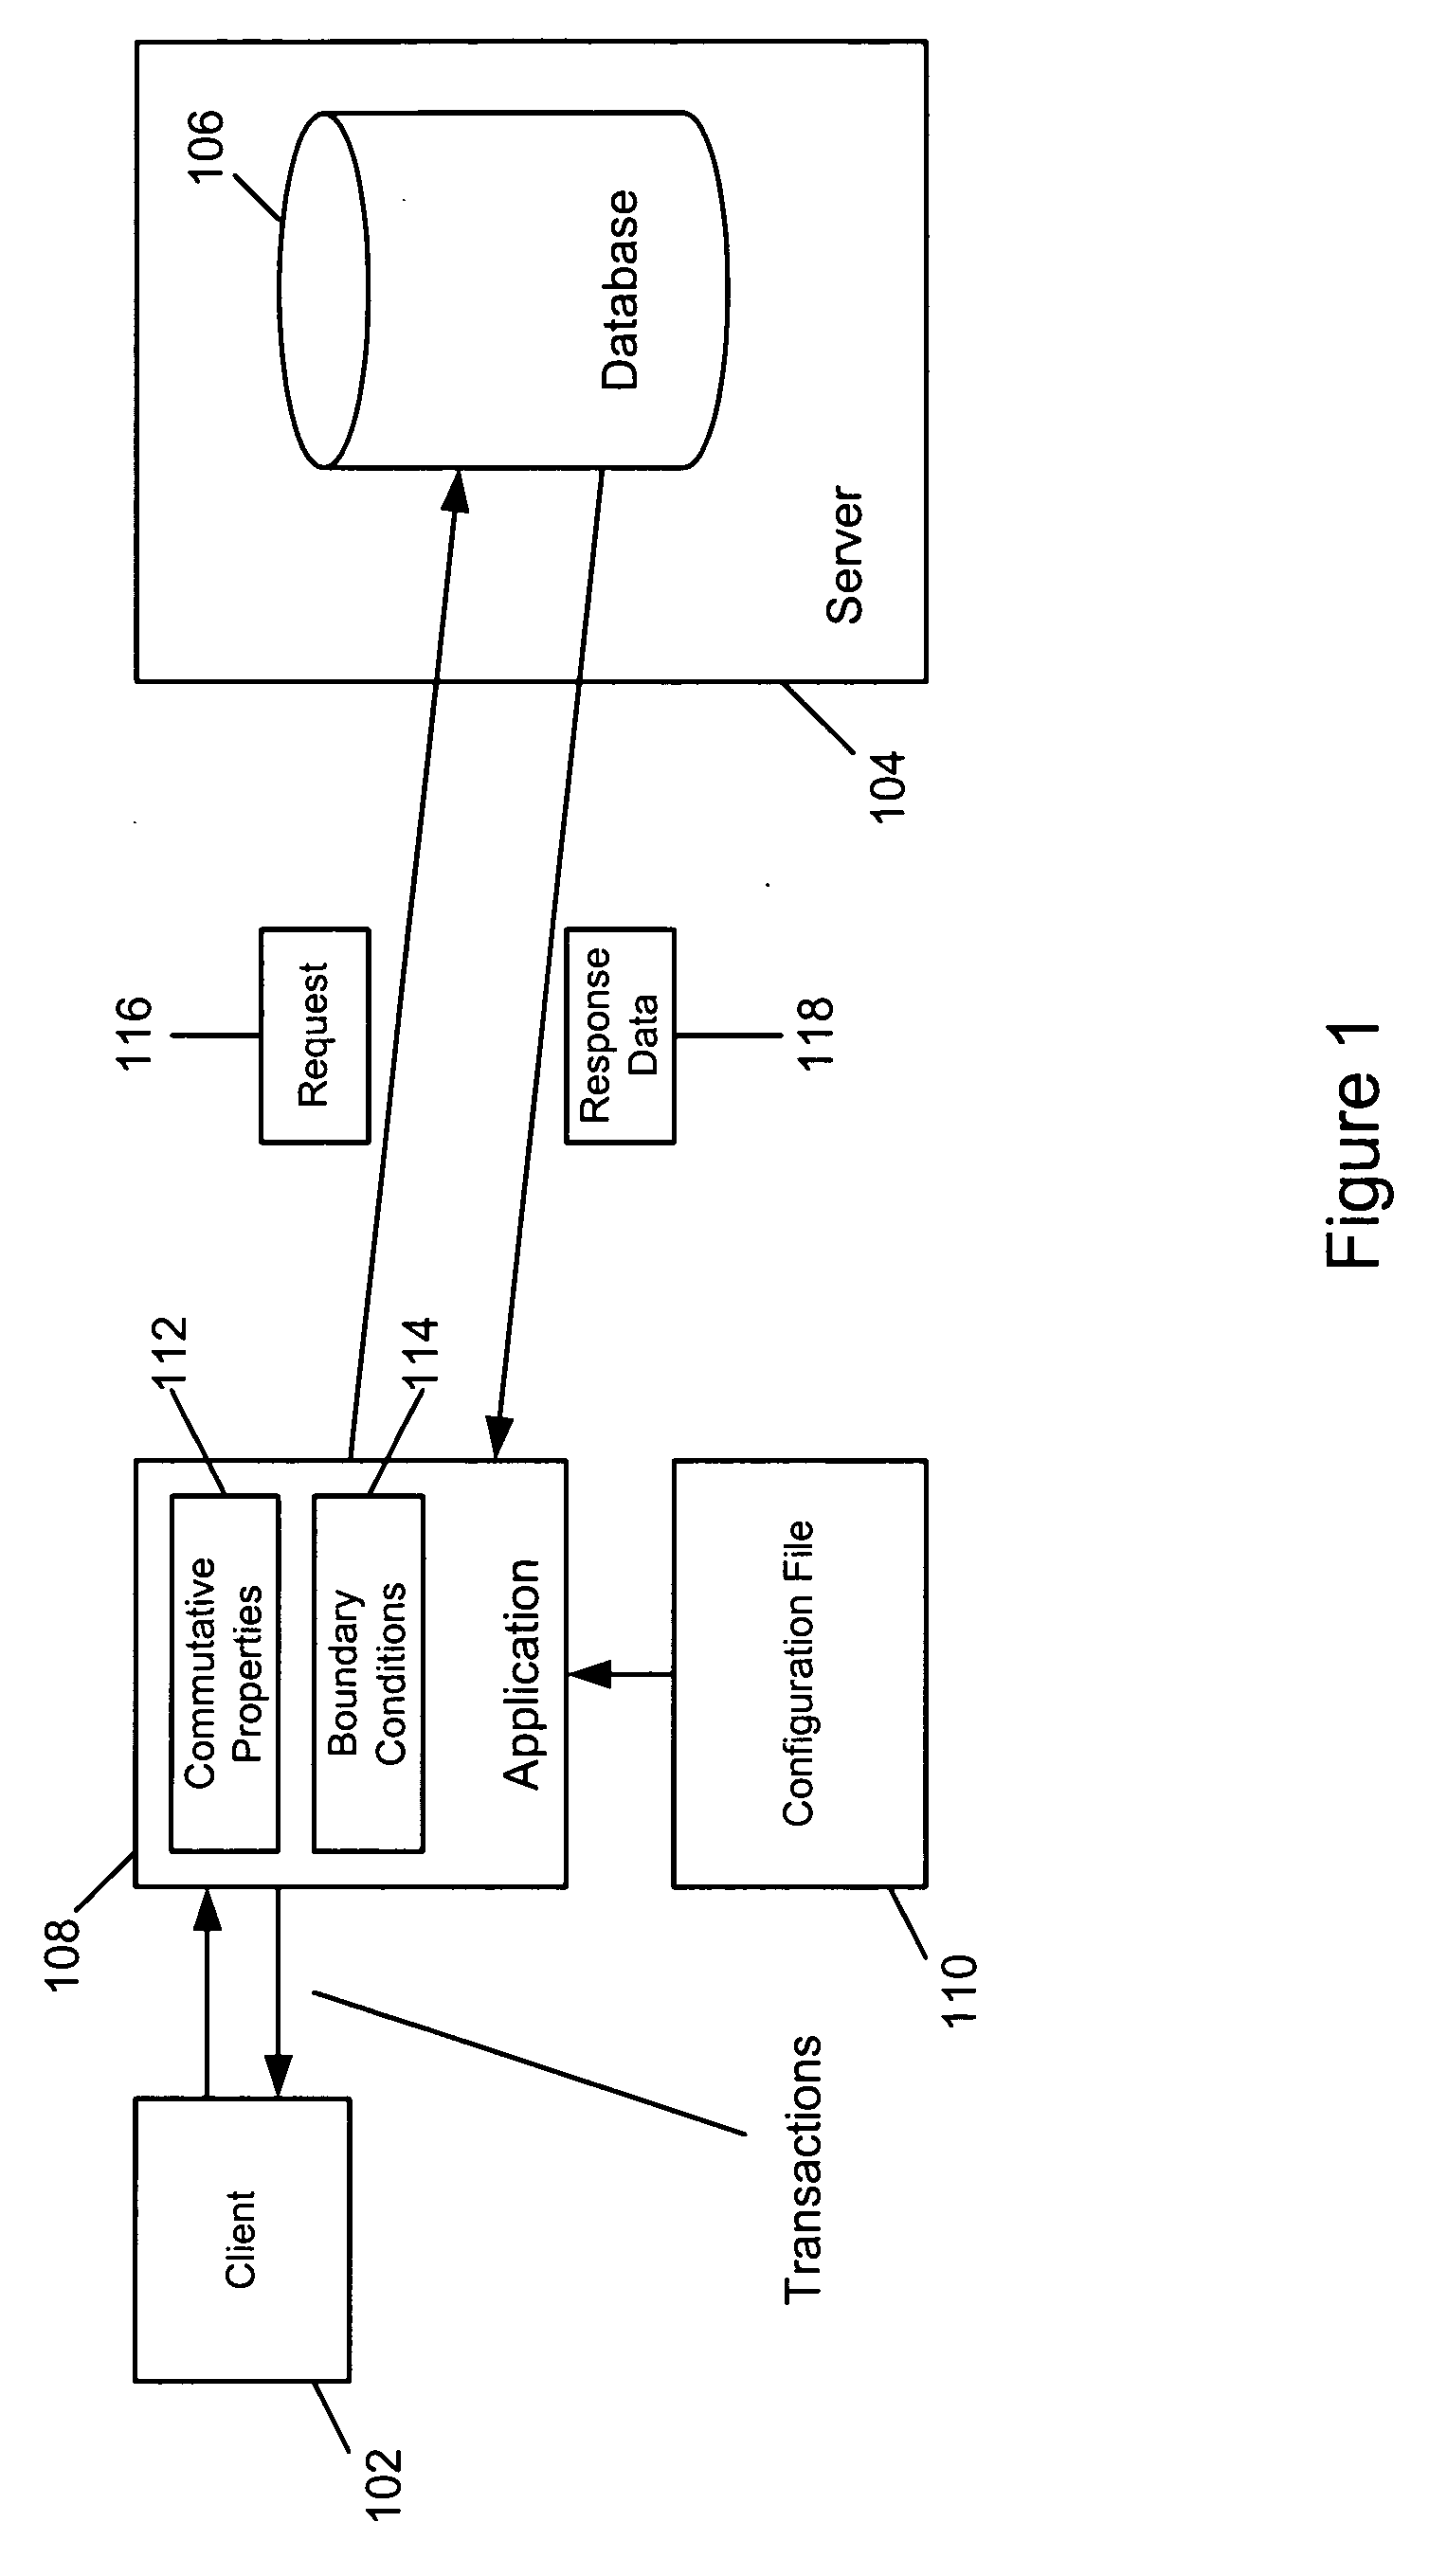 System and method for performing commutative operations in data access systems